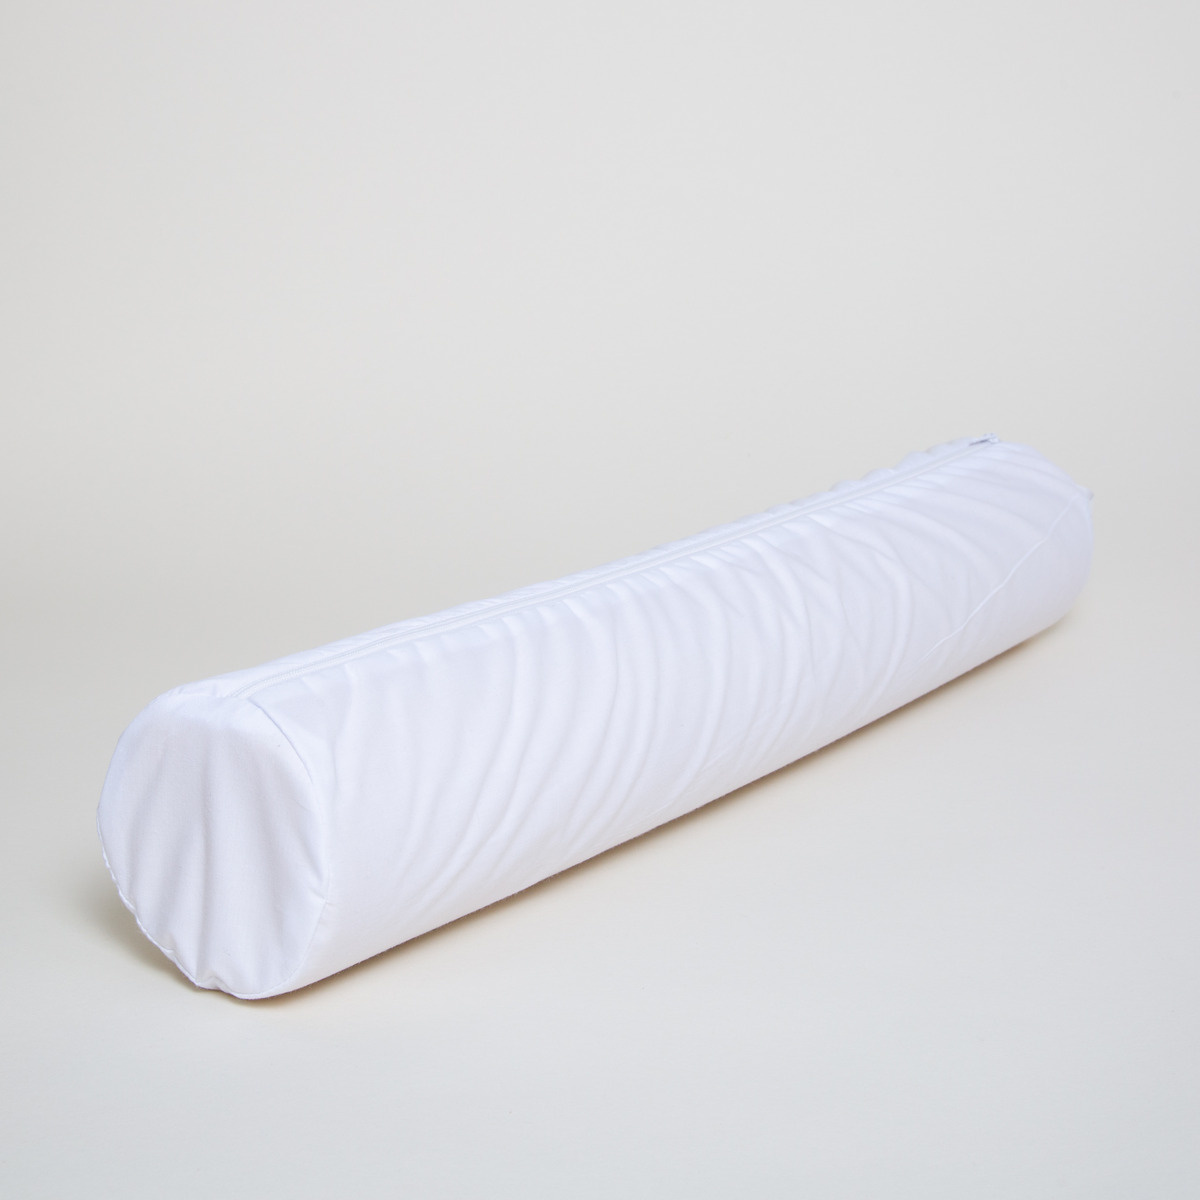 Neck Roll / Bolster Pillow for Sleeping and Pain Relief - Neck